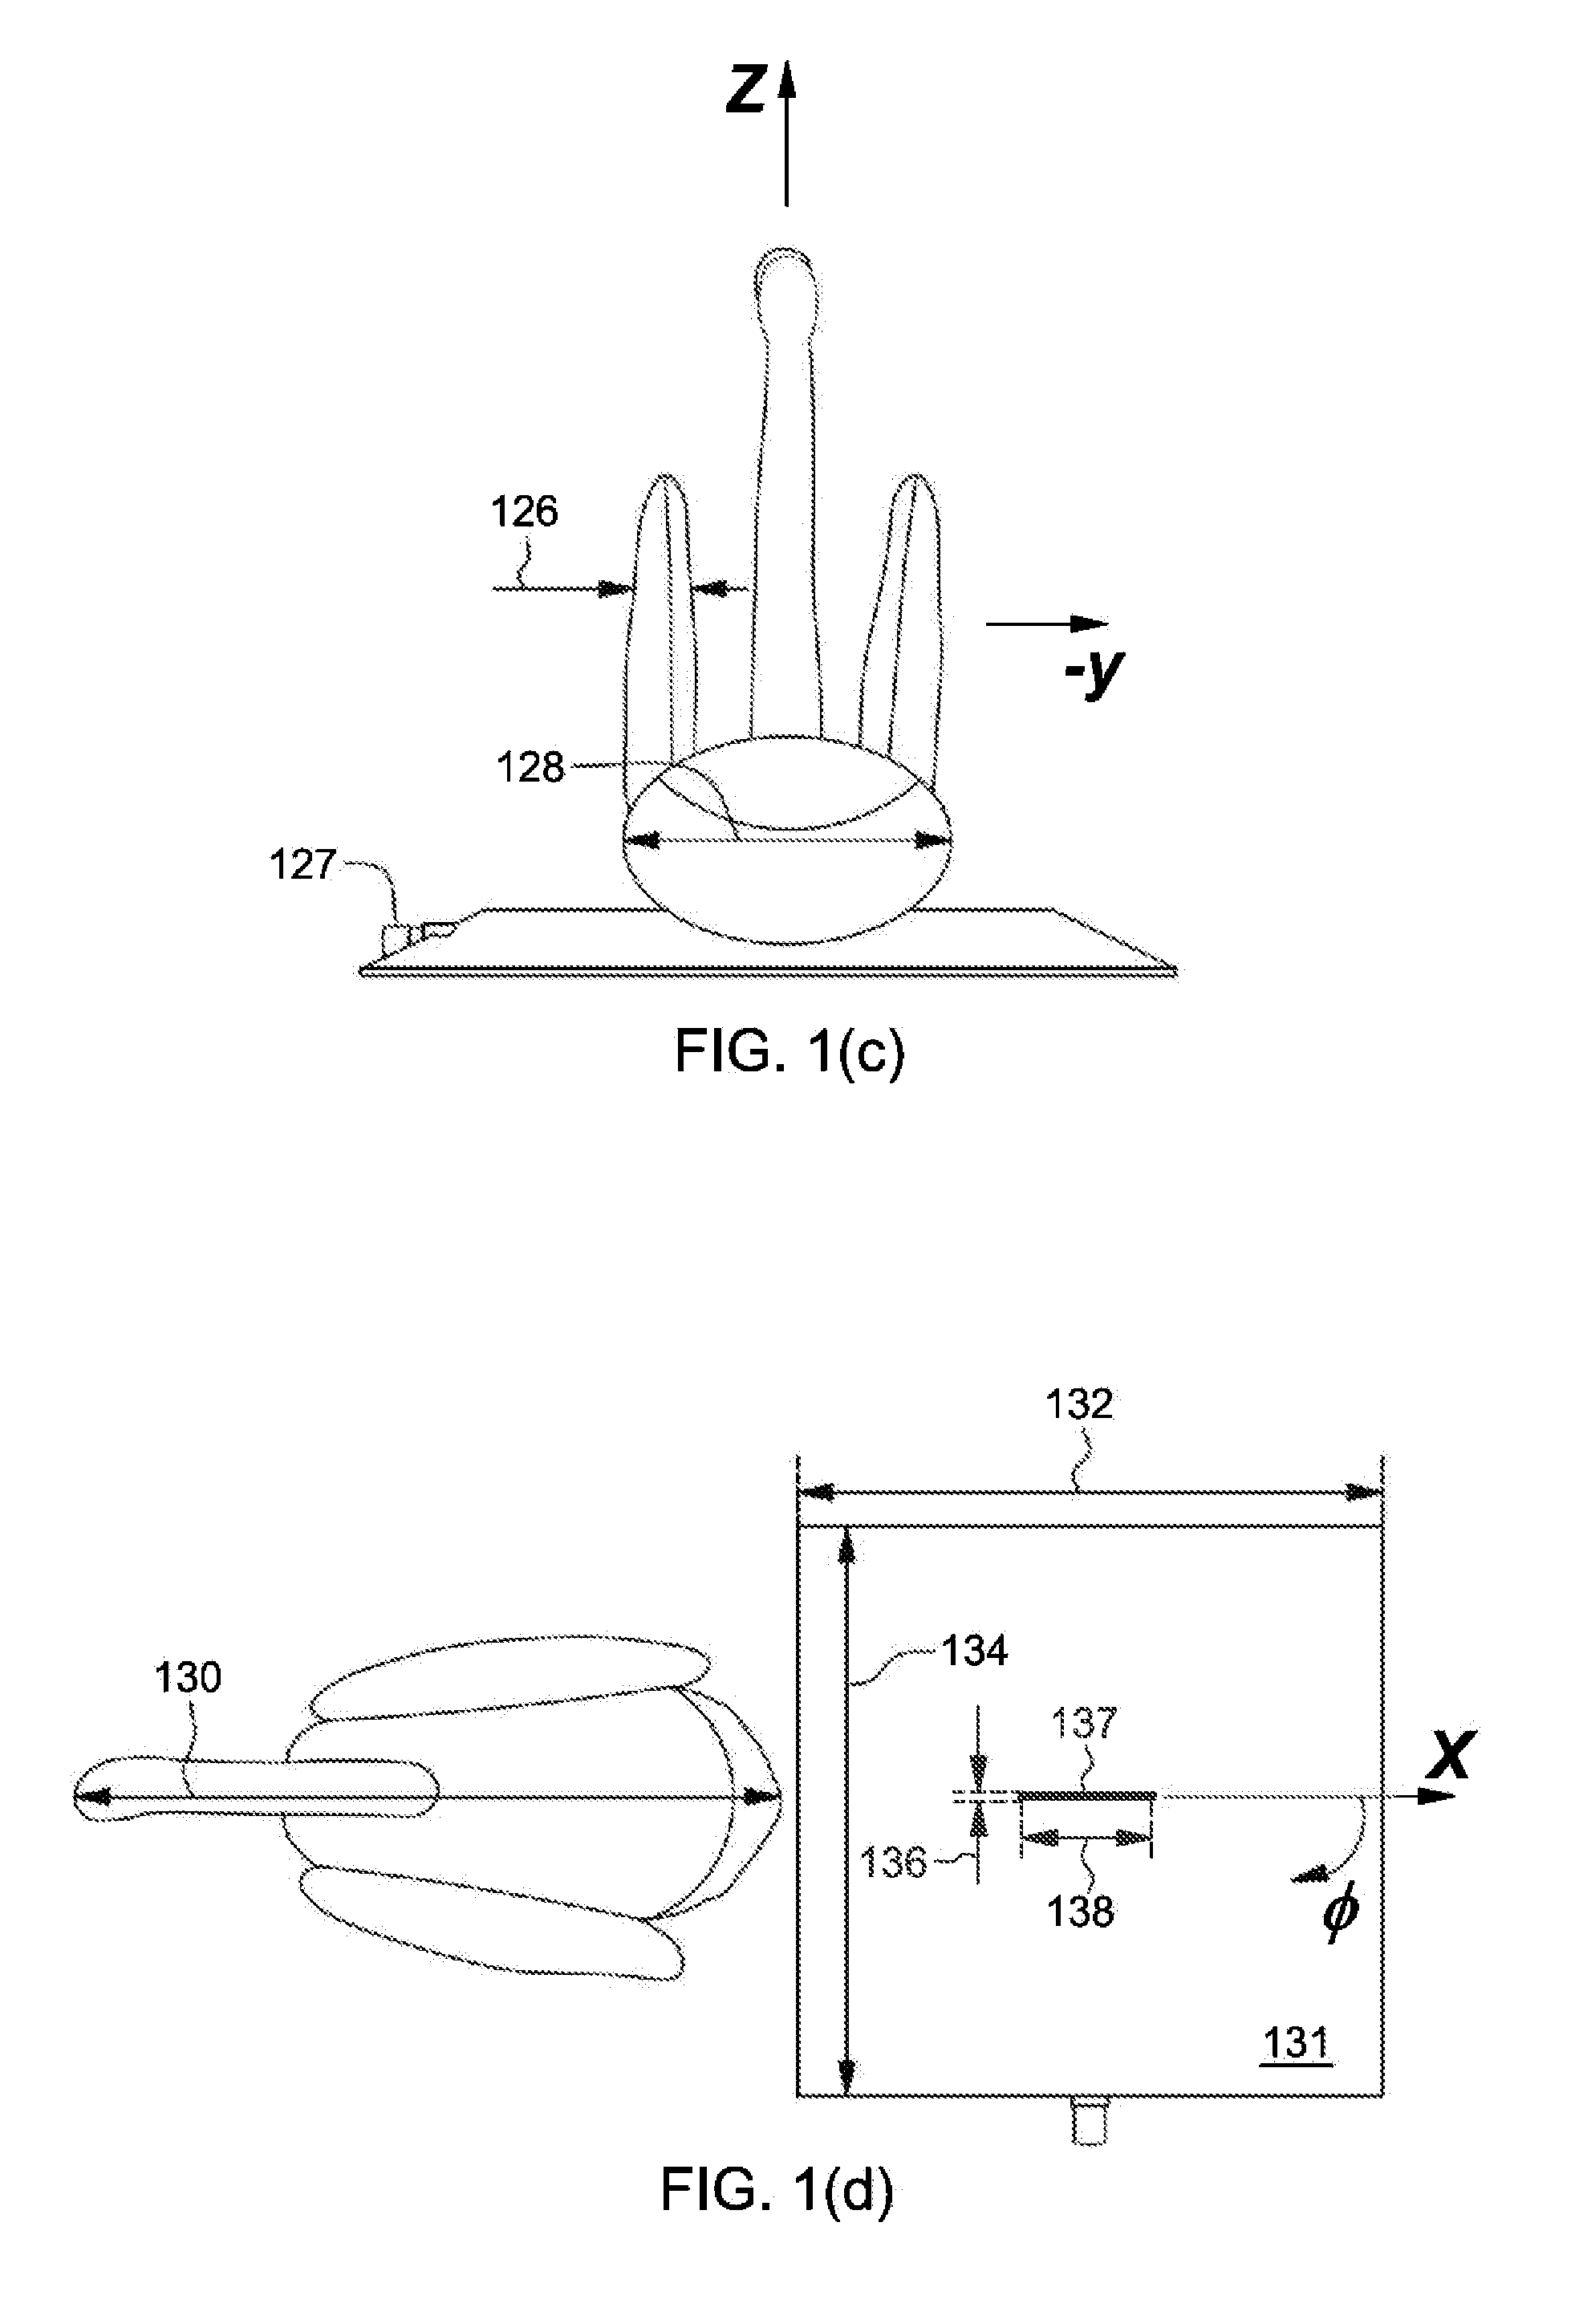 Aesthetic dielectric antenna and method of discretely emitting radiation pattern using same